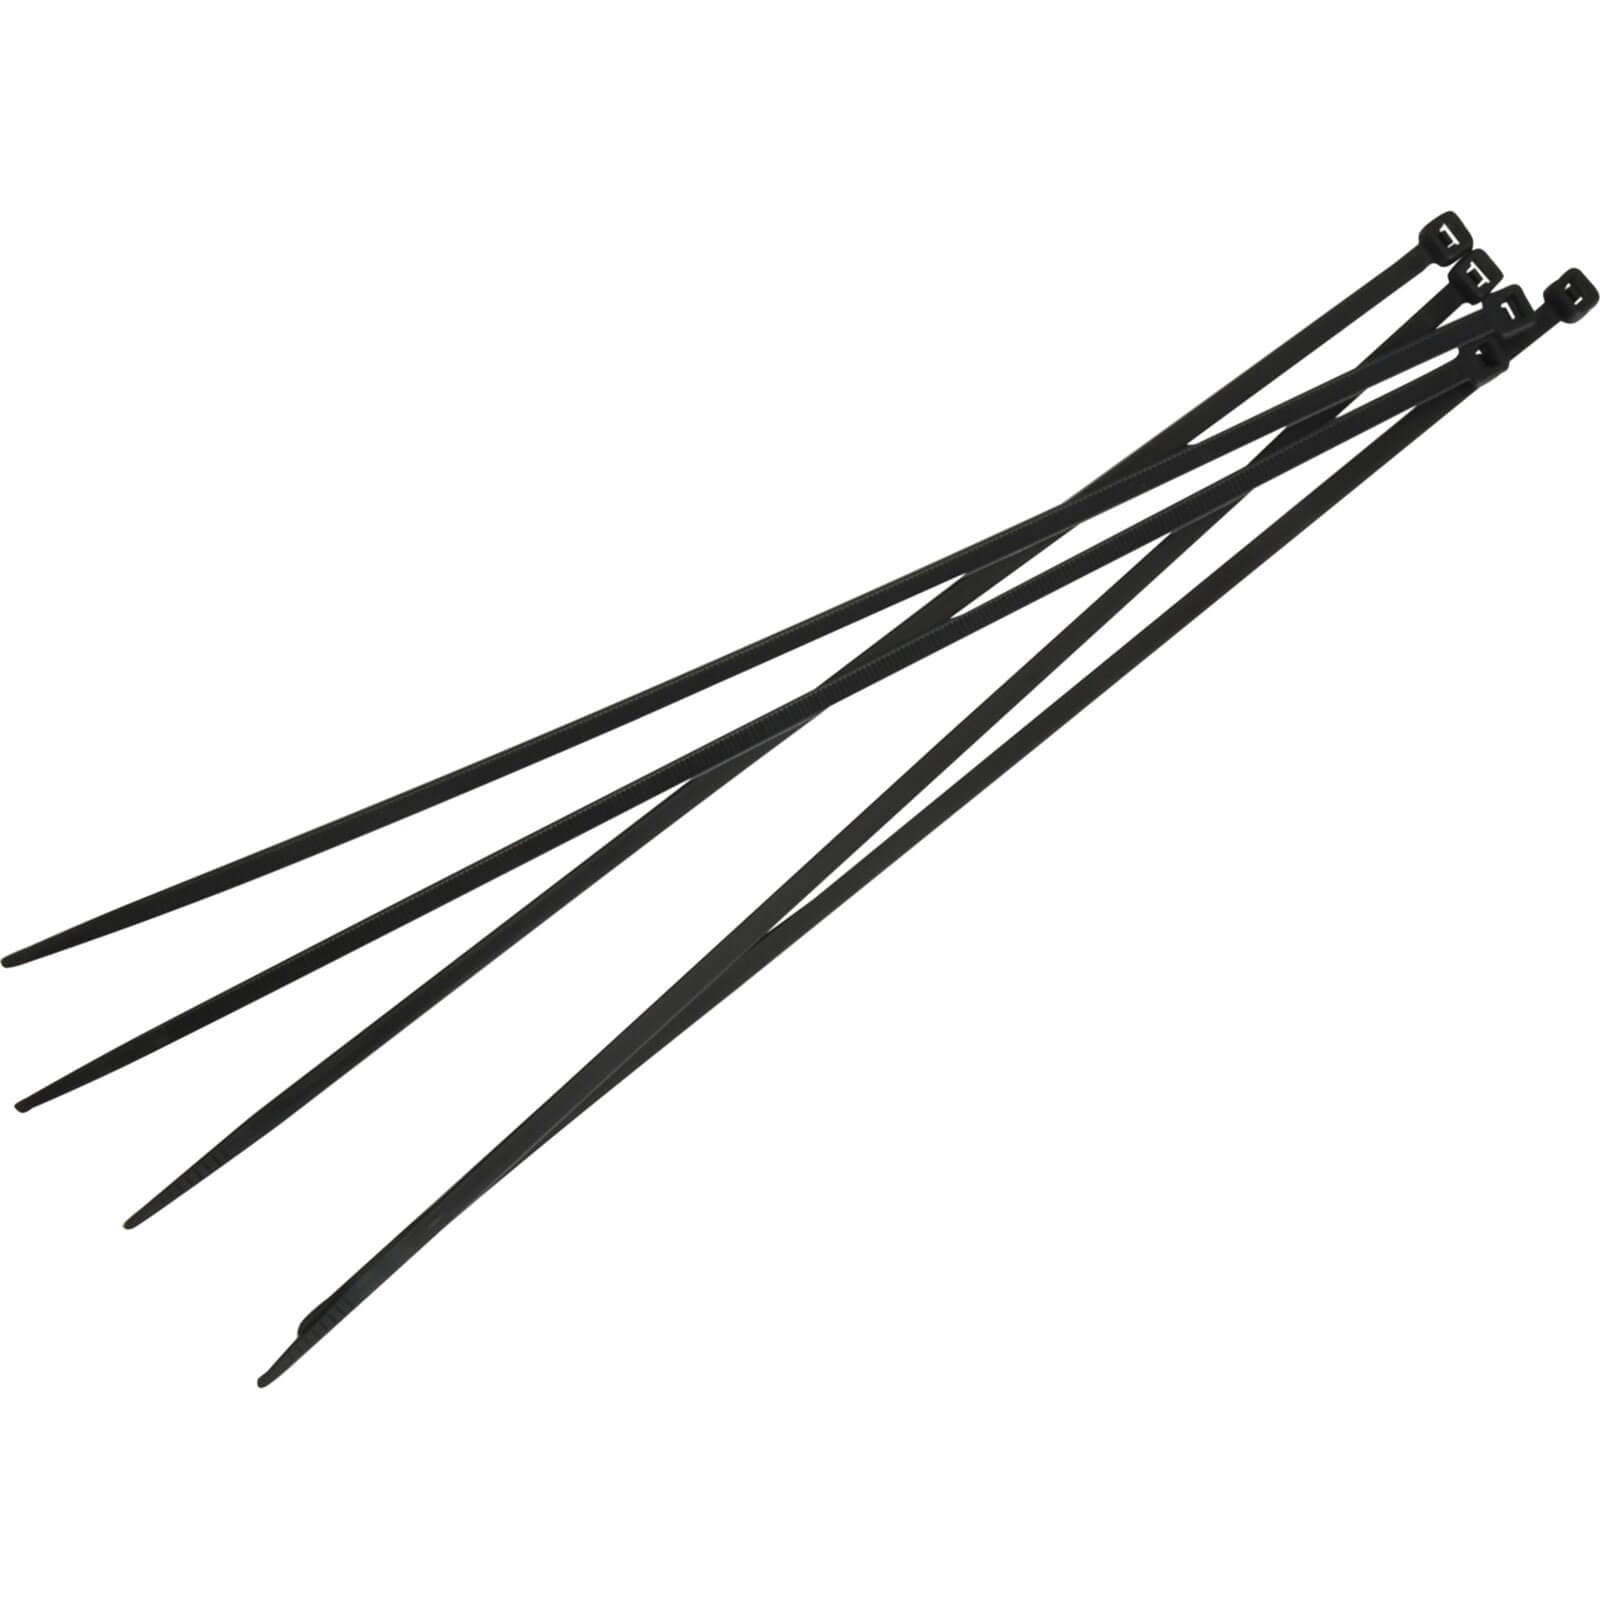 Photos - Cable Tie / Pipe Clamp Faithfull Cable Ties Black Pack of 100 300mm 4.8mm FAICT300B 